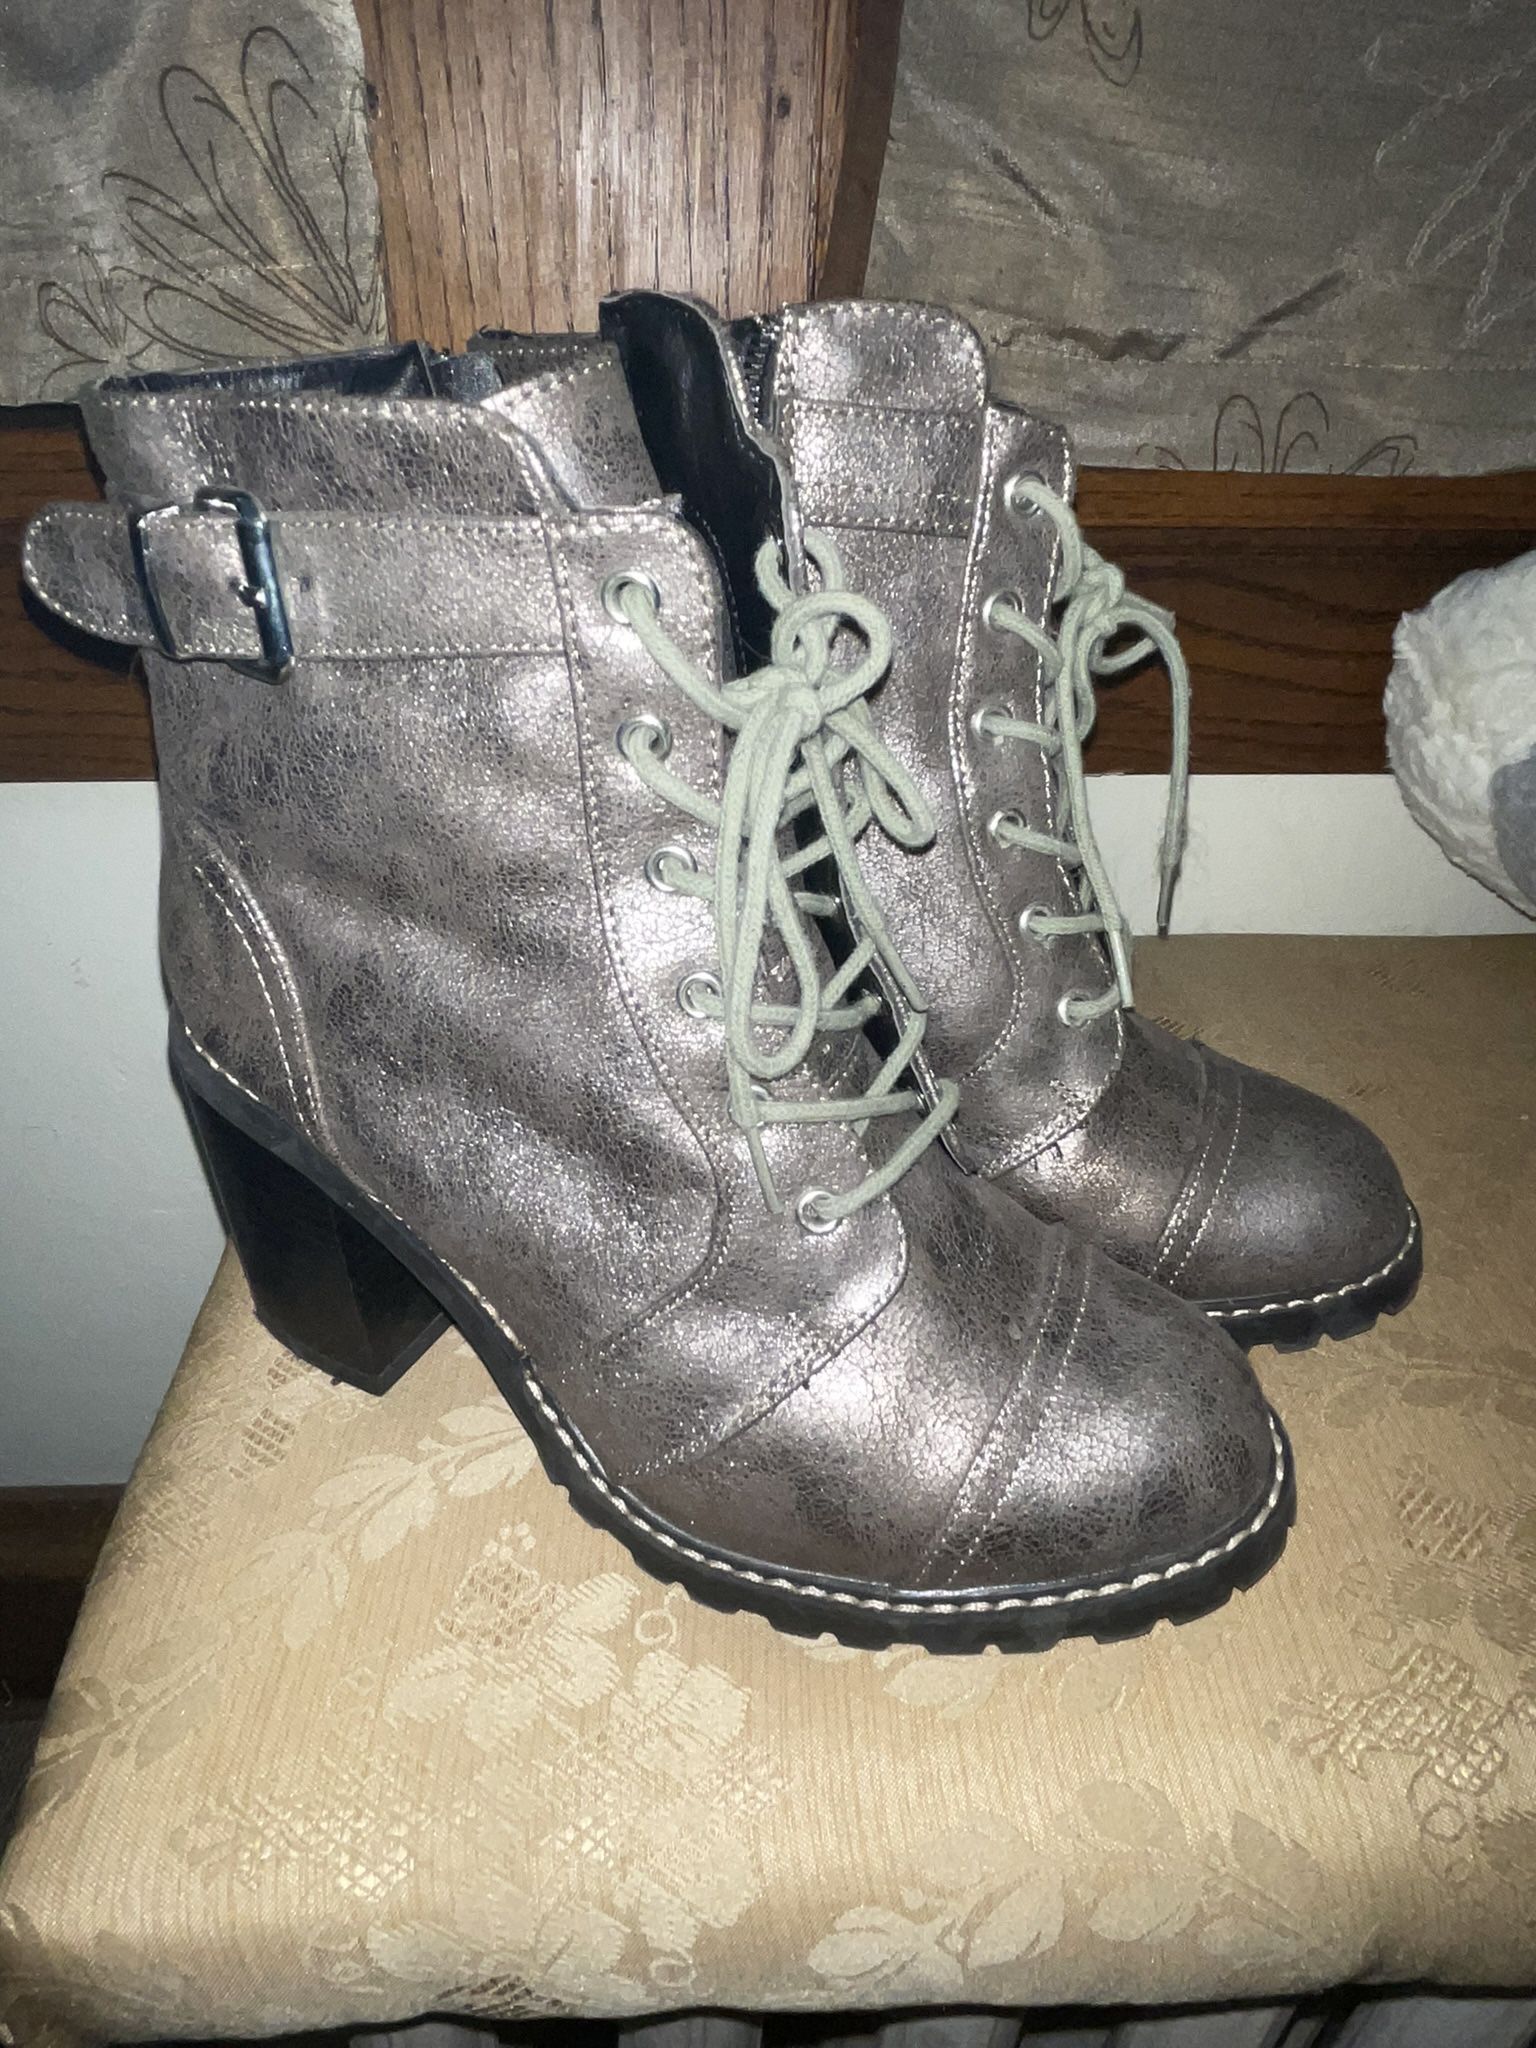 Womens 7.5 Boots, Metallic Pewter color. 3” Heel. Zipper on sides excellent condition